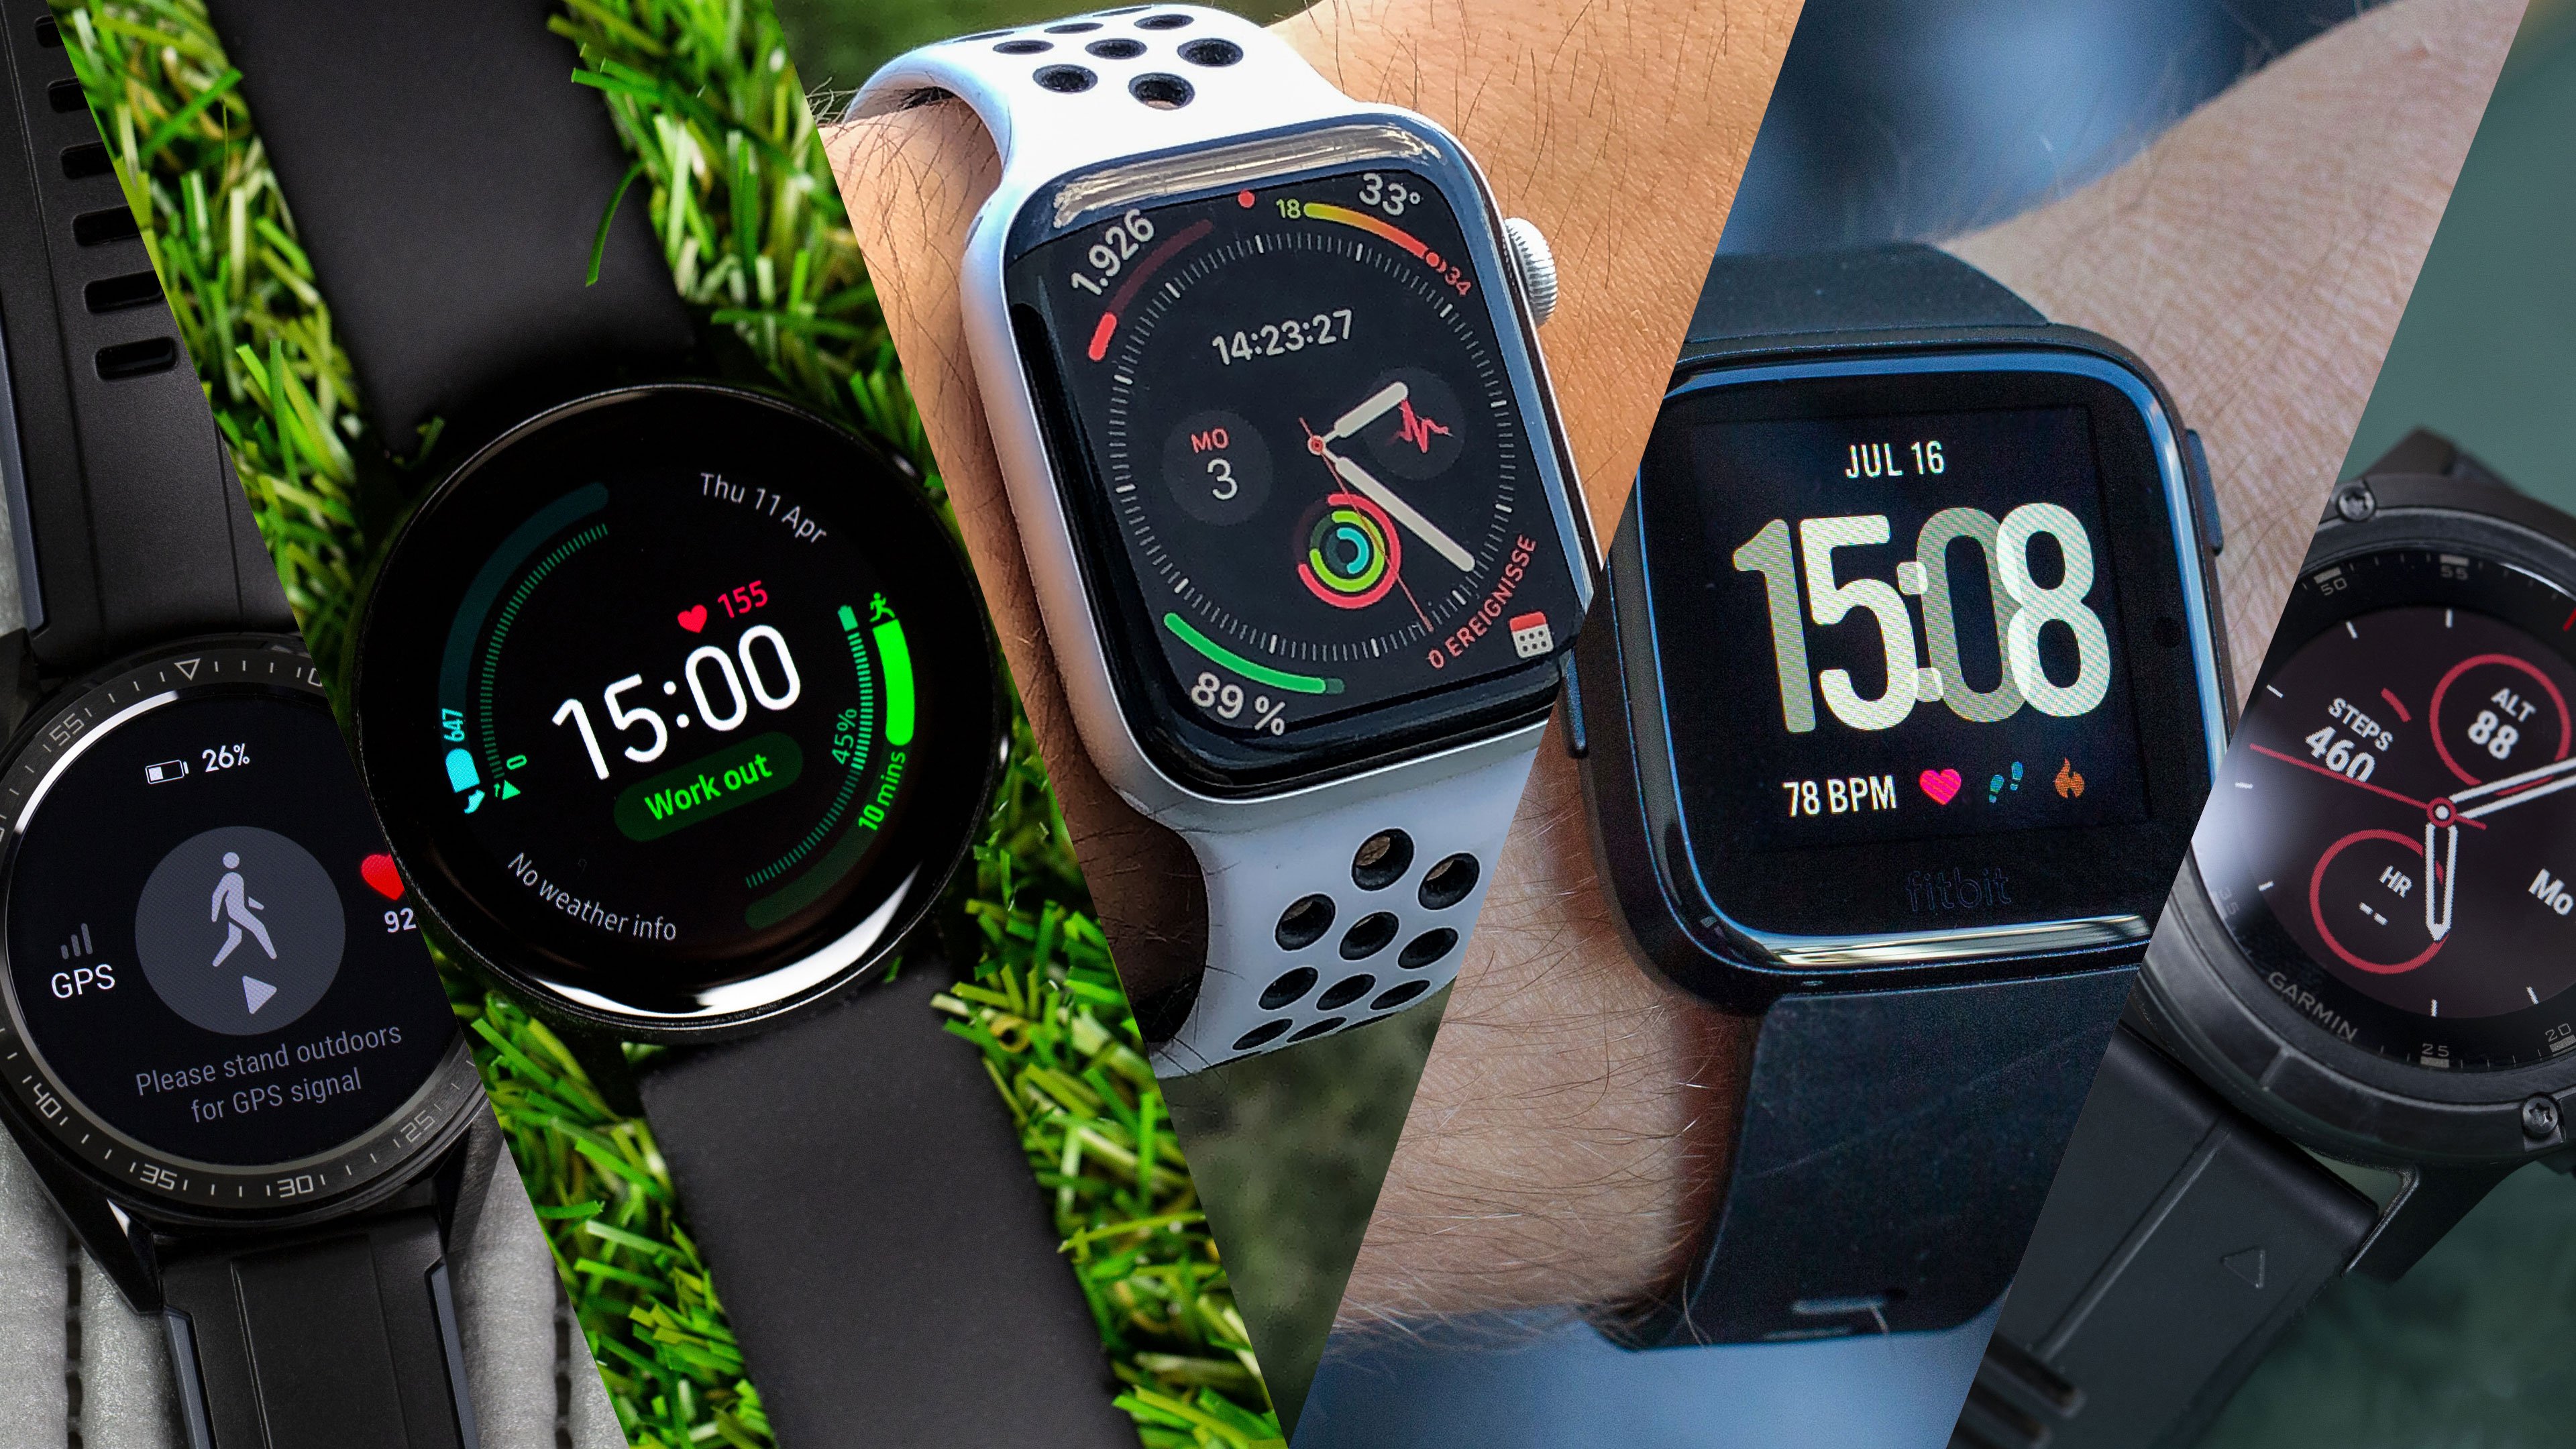 The best Apple and Android smartwatches of 2020 NextPit